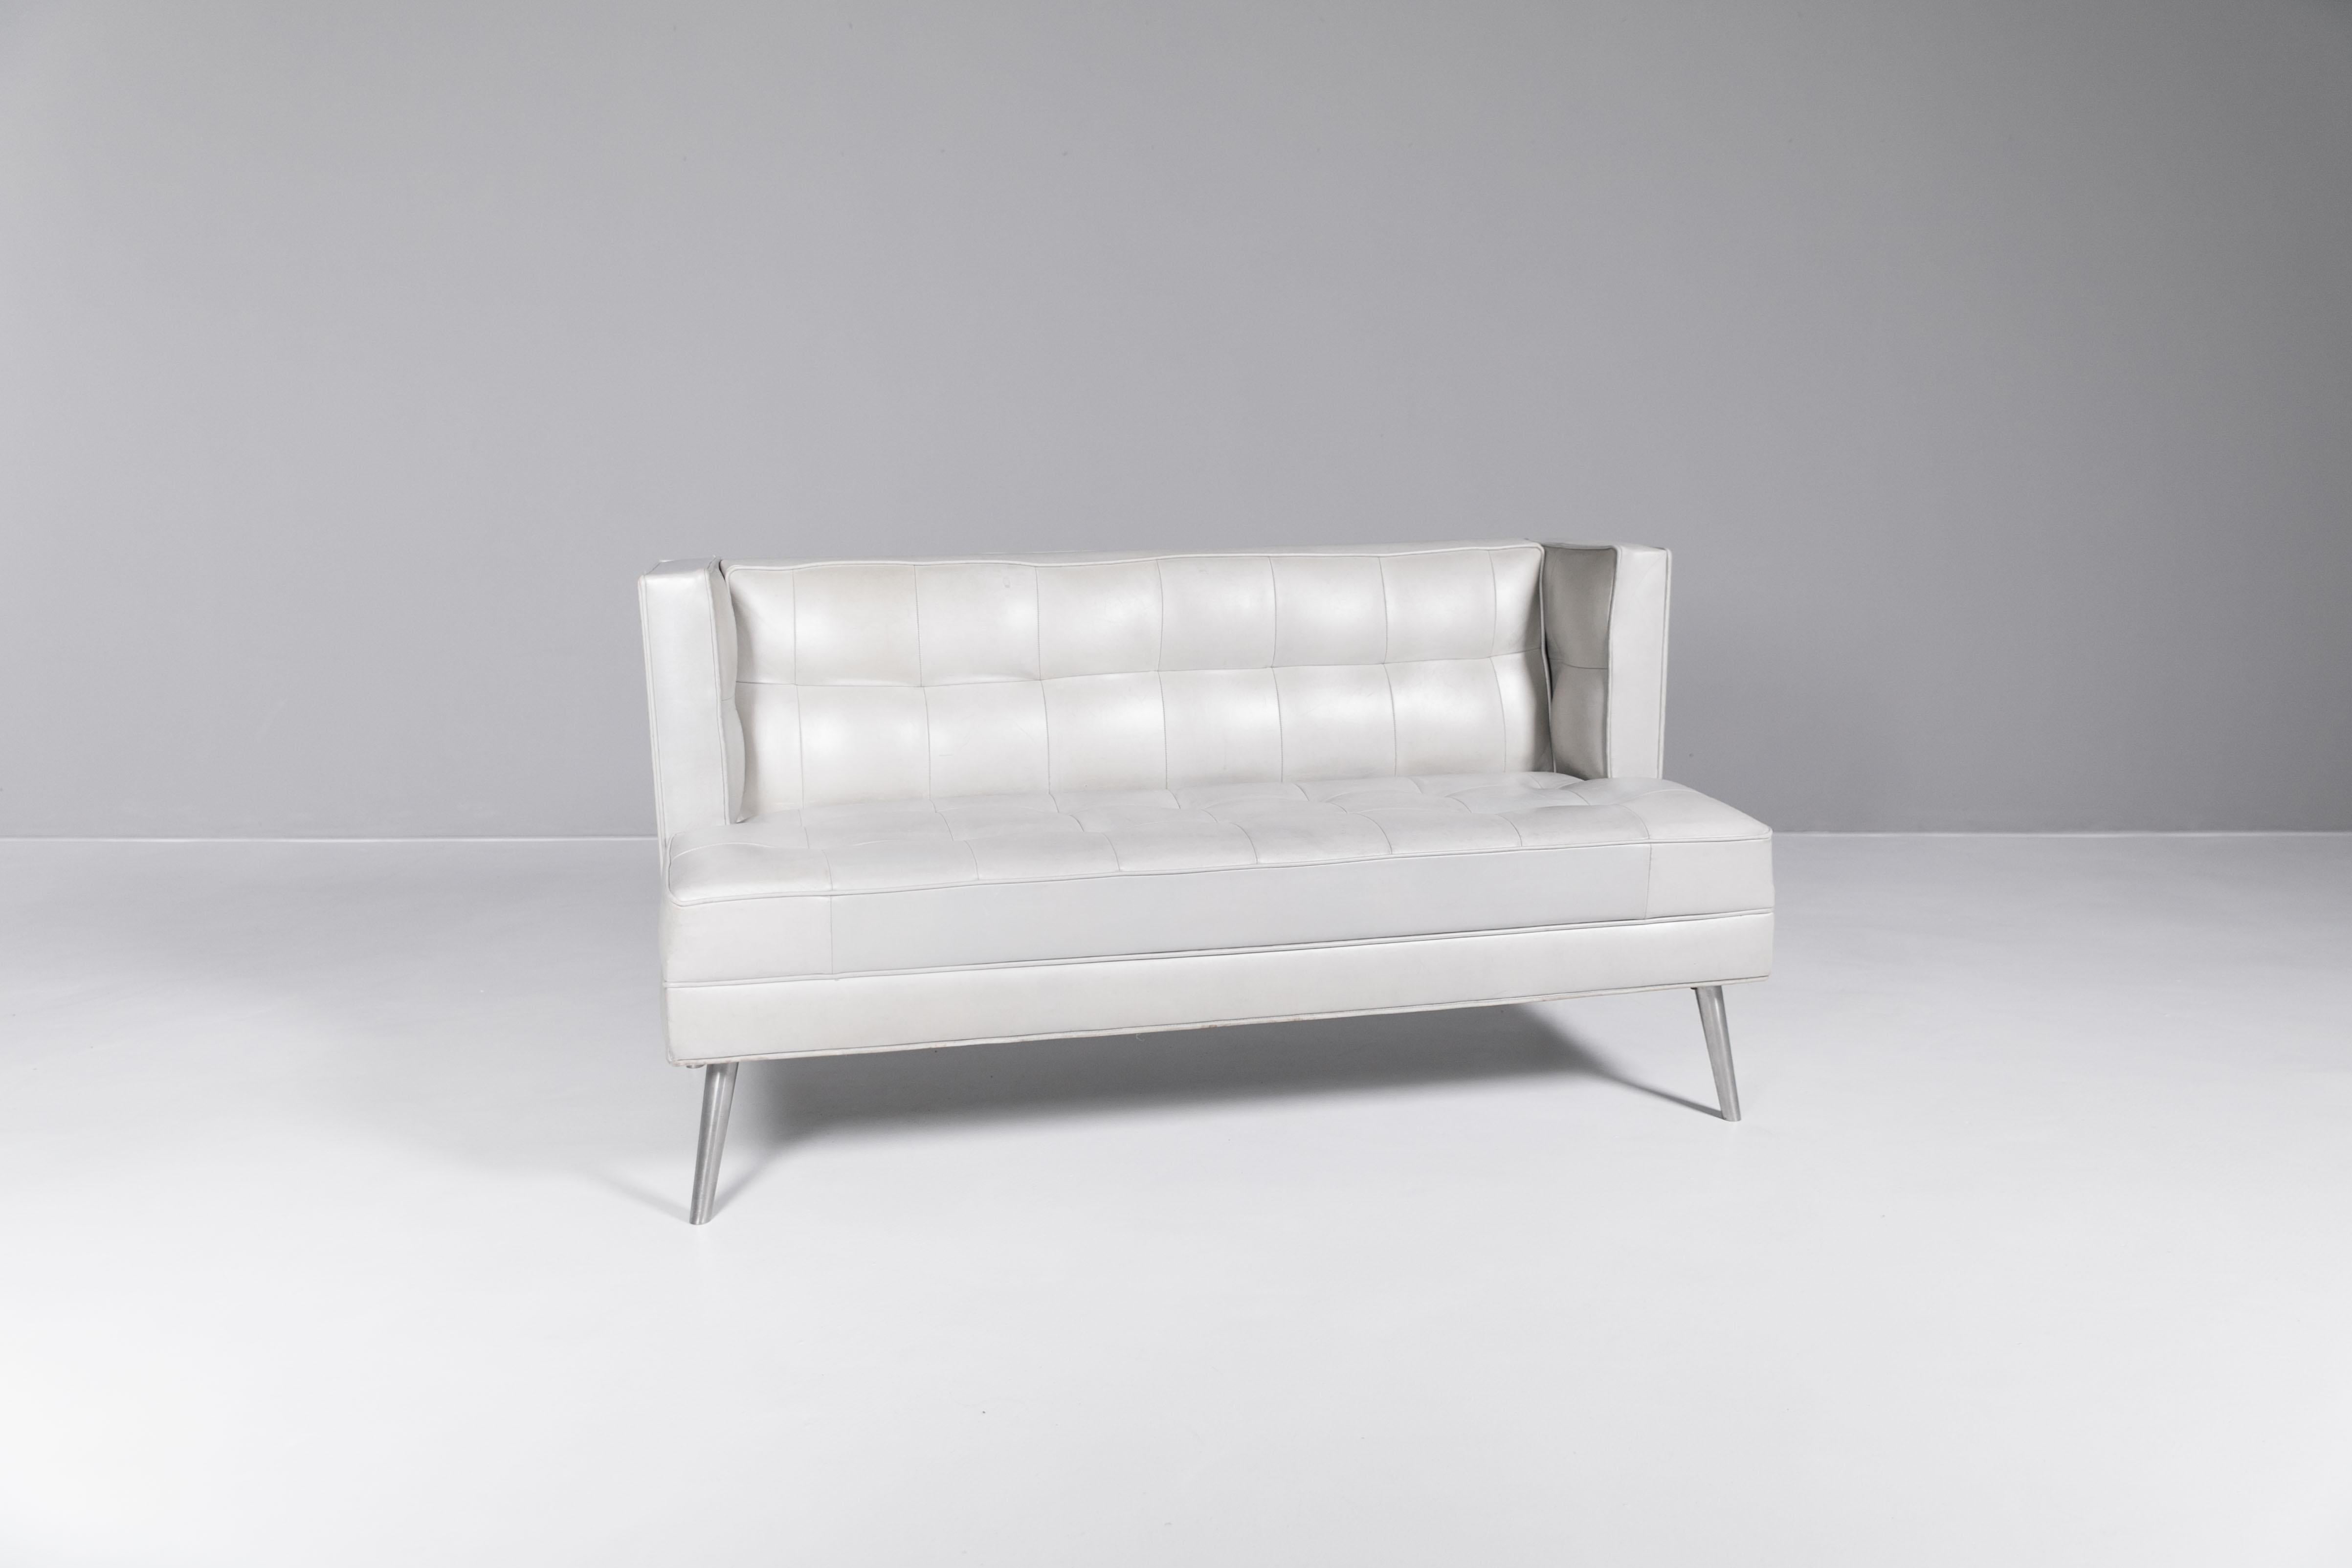 Contemporary Philippe Starck, Two-Seater Sofa Designed for the Restaurant “Kong” Paris For Sale